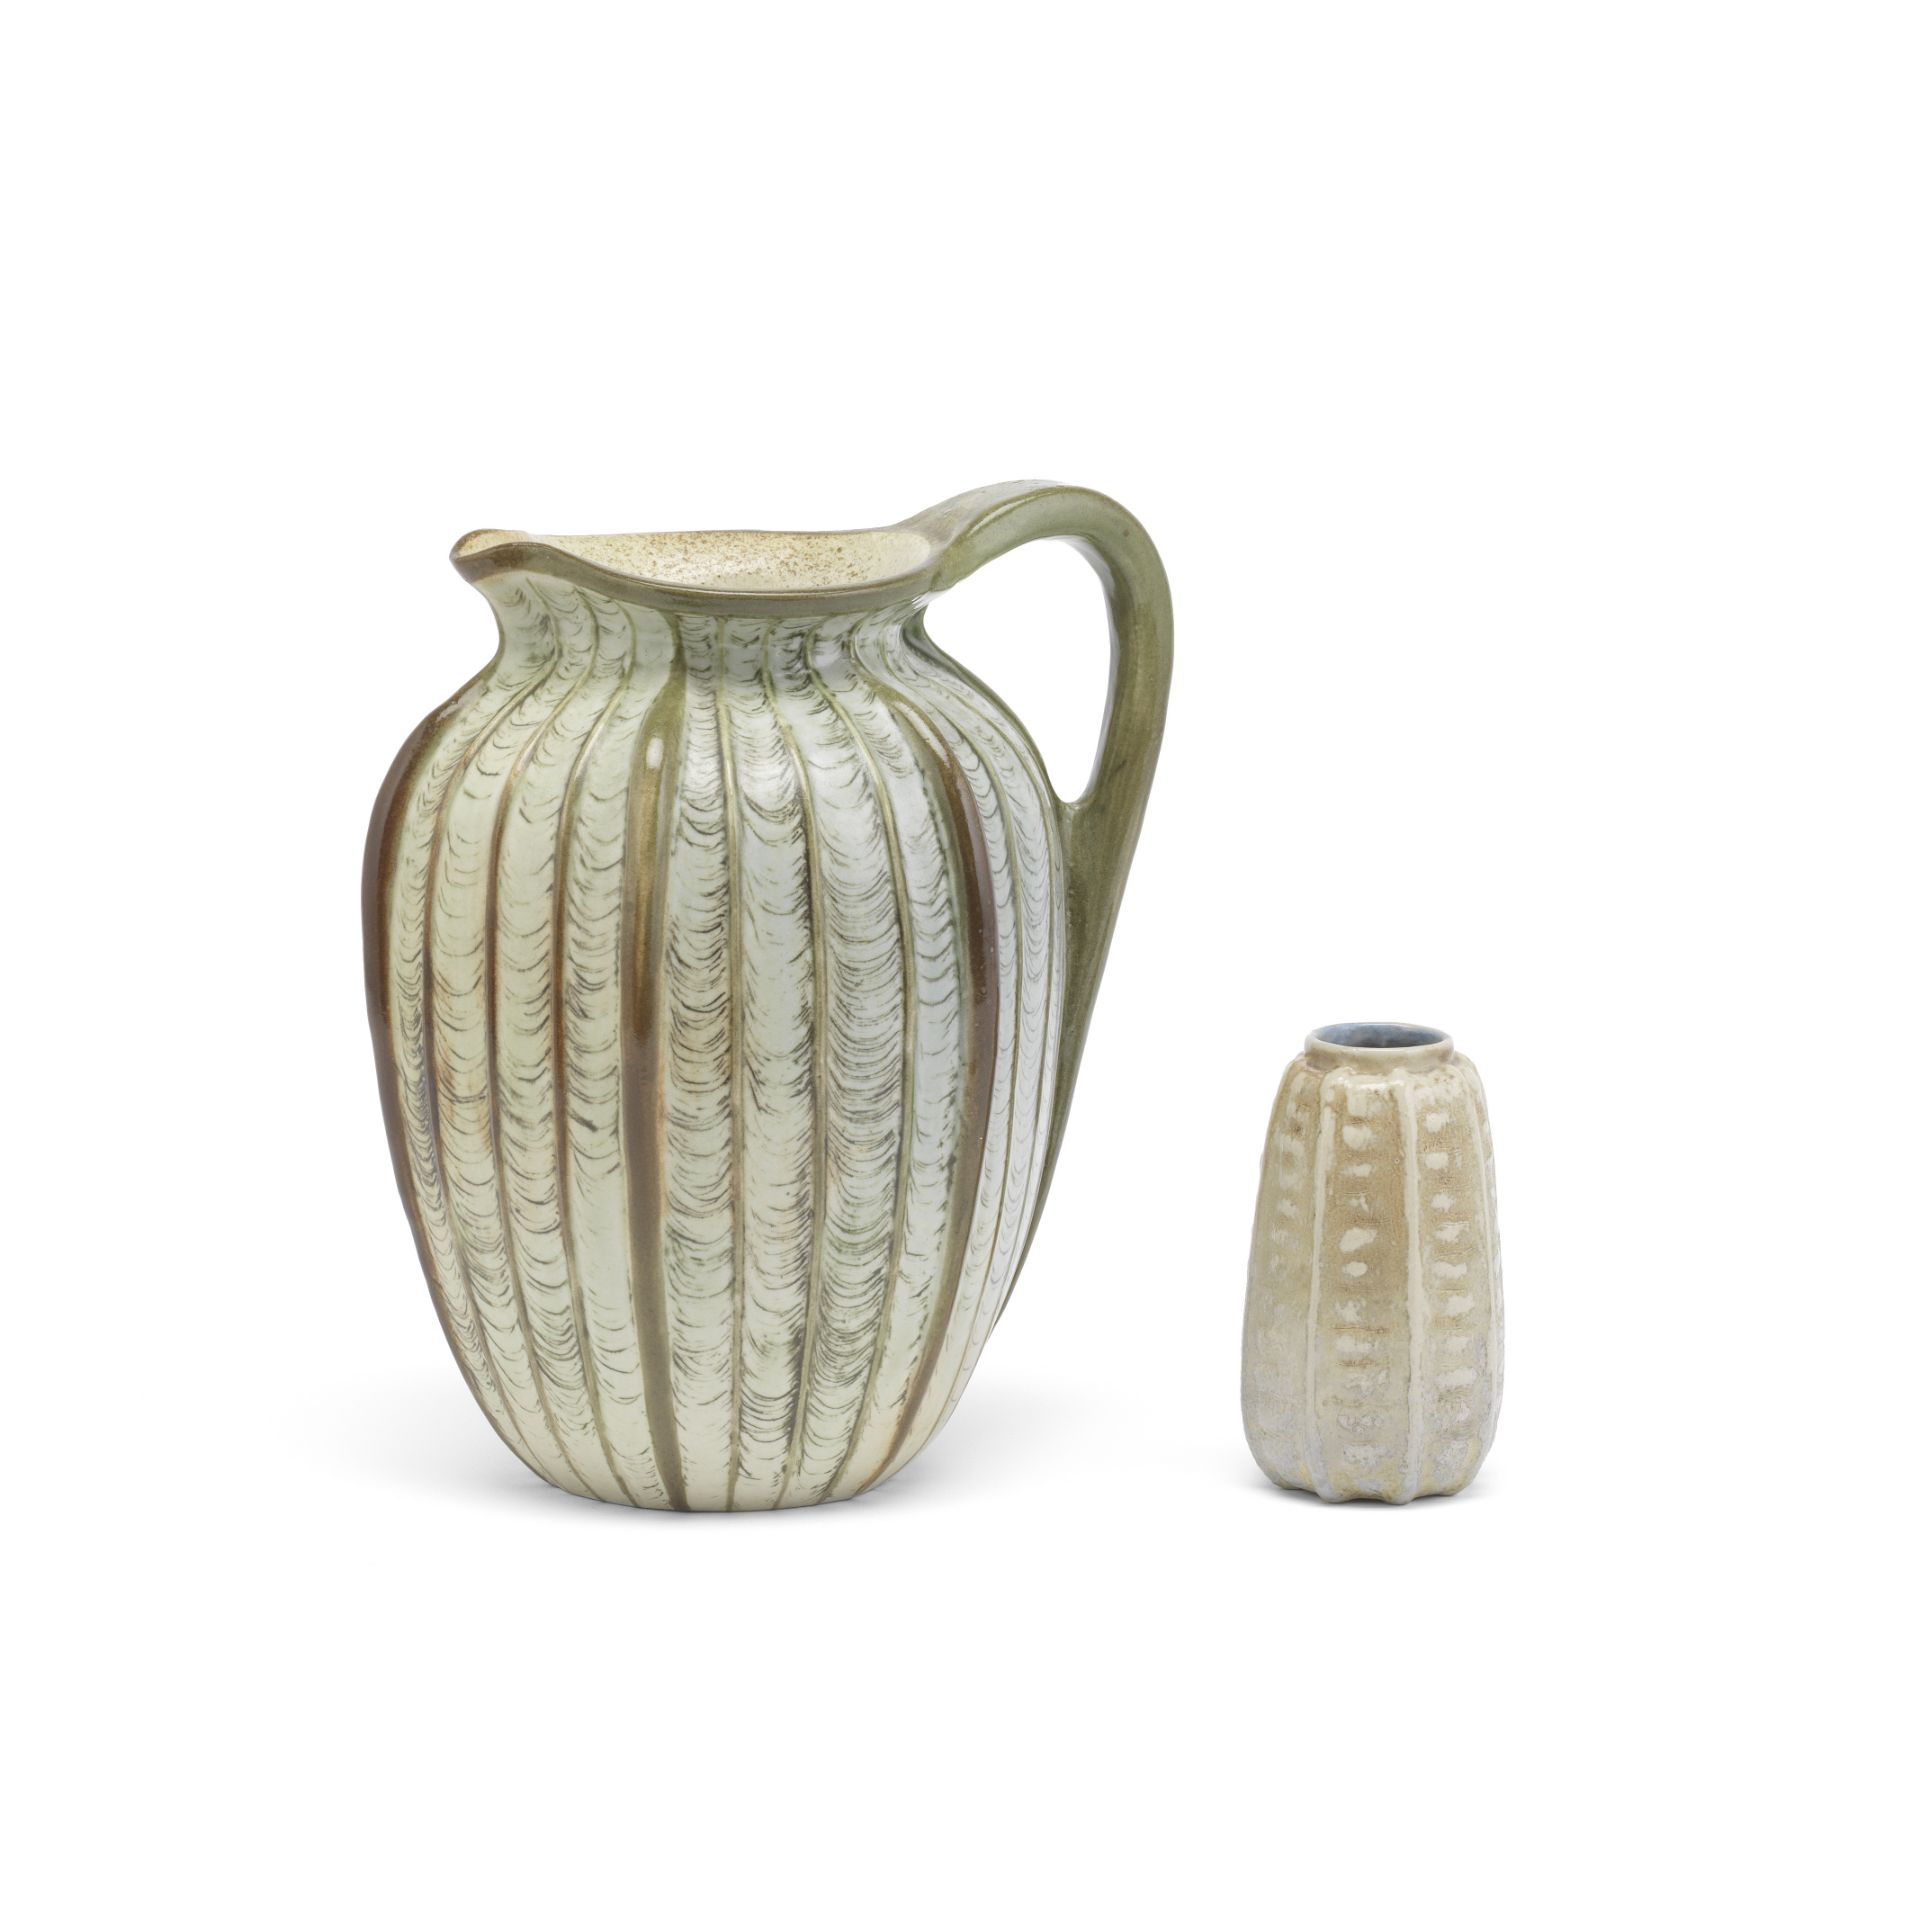 Martin Brothers 'Gourd' jug and small vase, 1900 and 1902